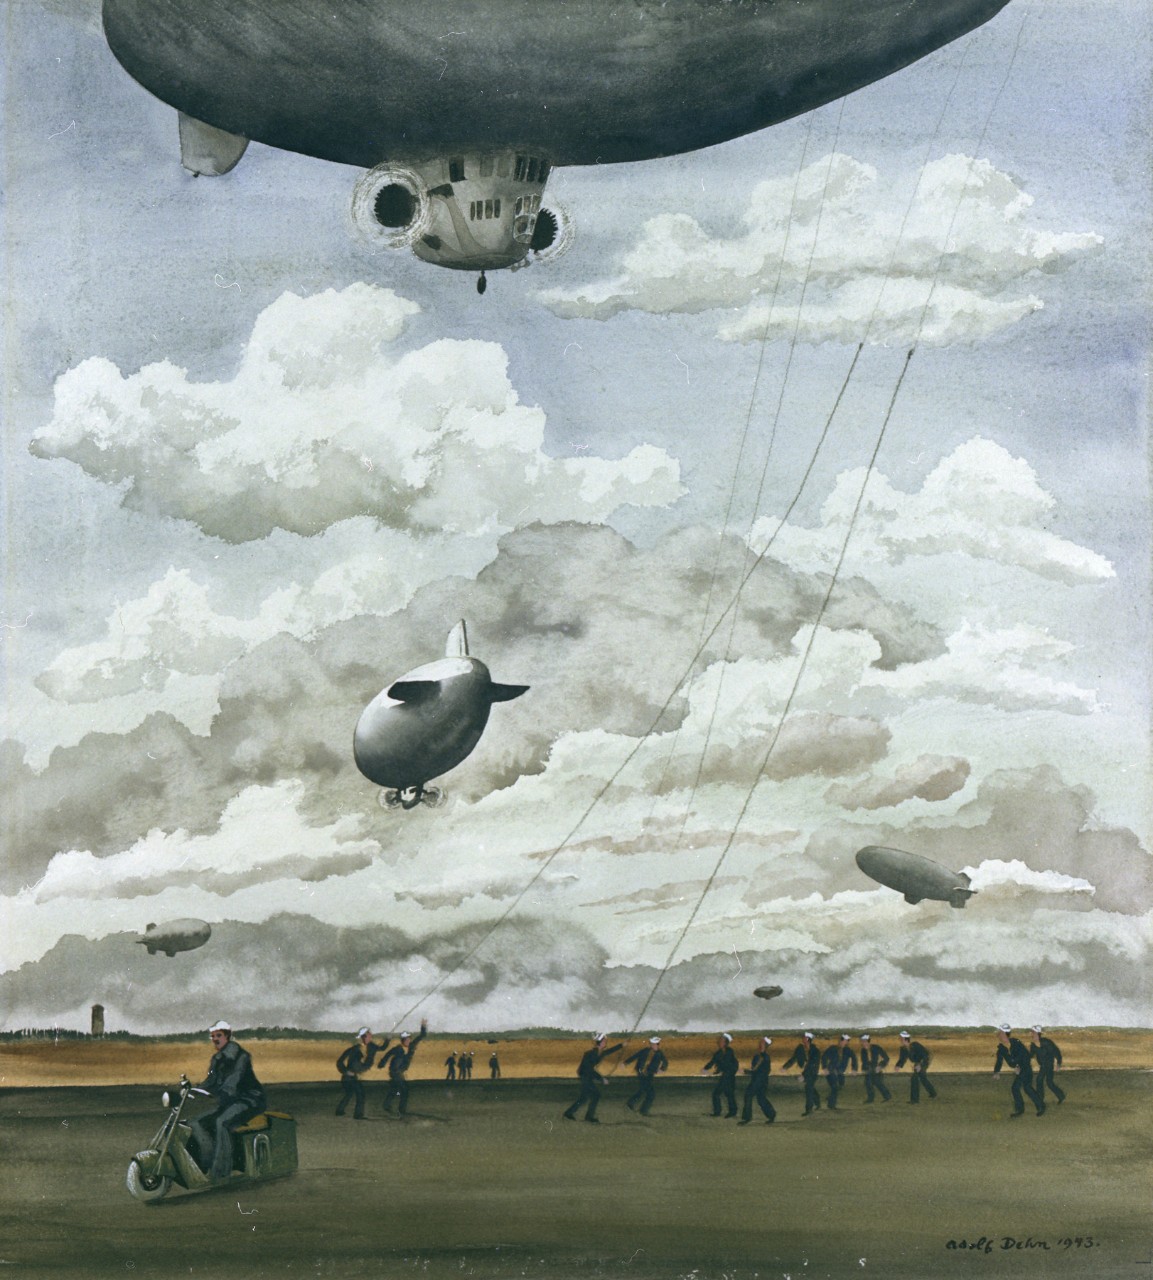 A ground crew grabs the lines from the blimp